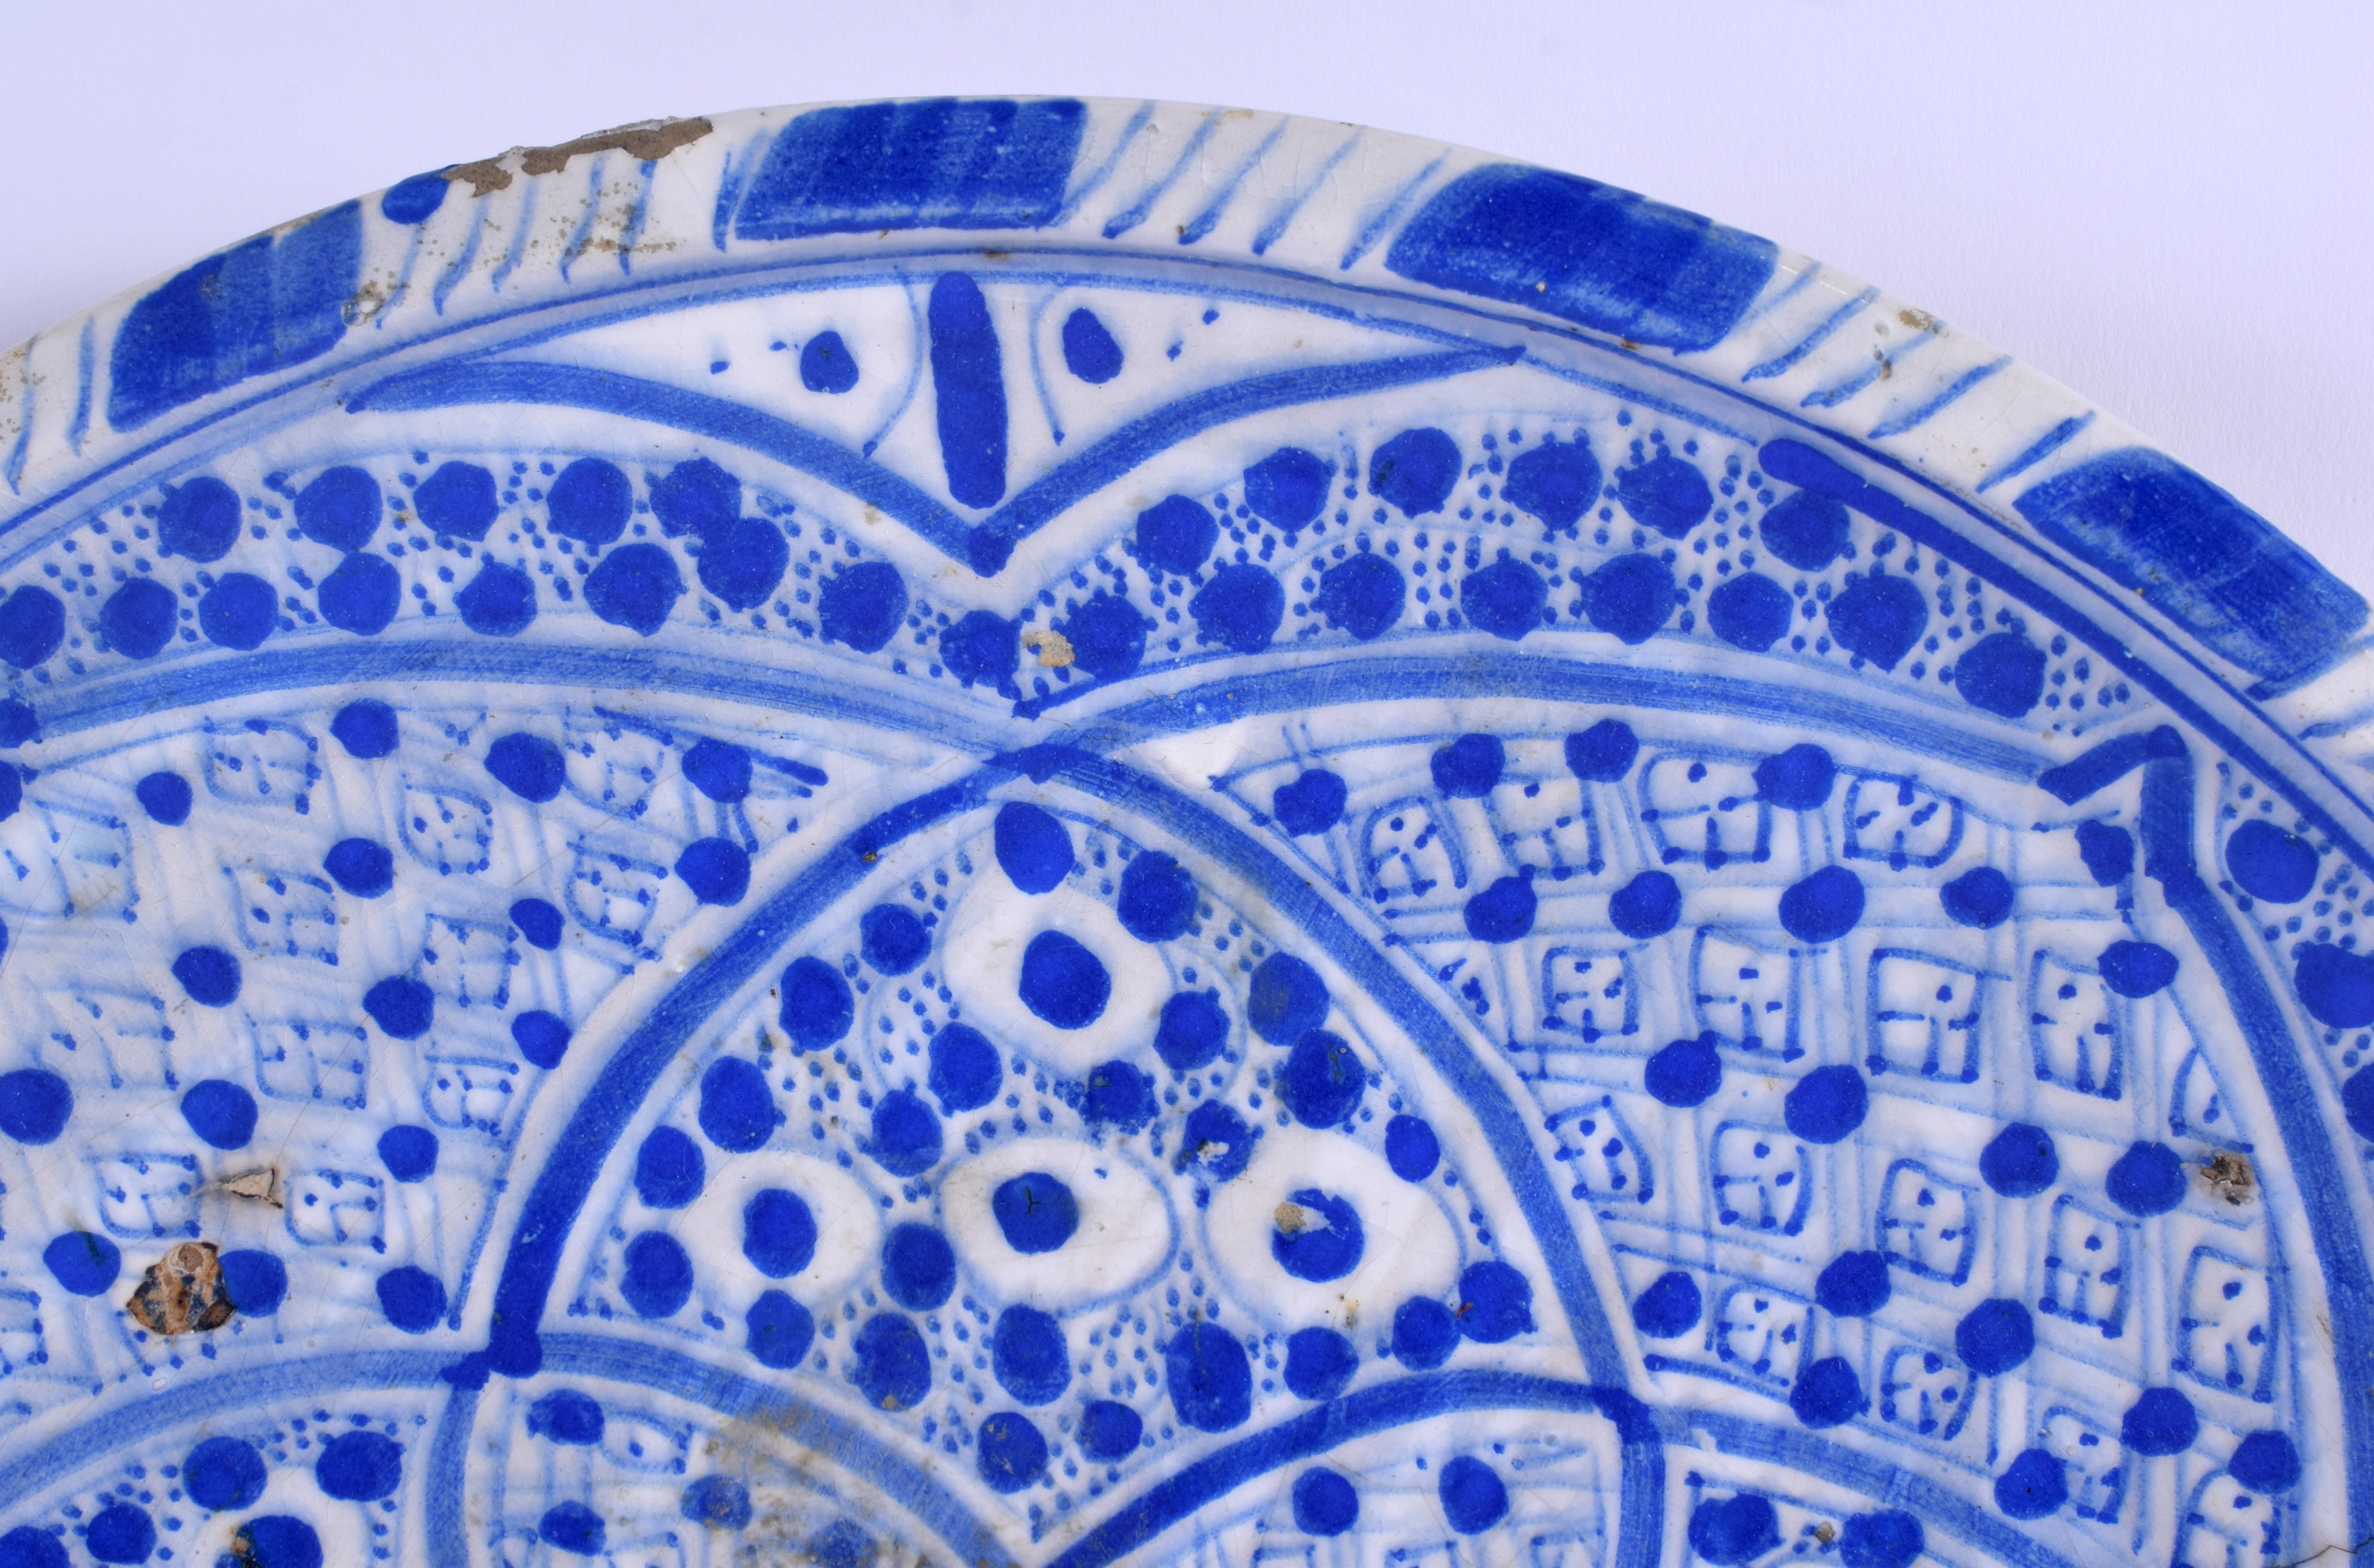 A 19TH CENTURY ARTS AND CRAFTS PERSIAN MIDDLE EASTERN BLUE AND WHITE DISH. 31 cm diameter. - Image 2 of 6